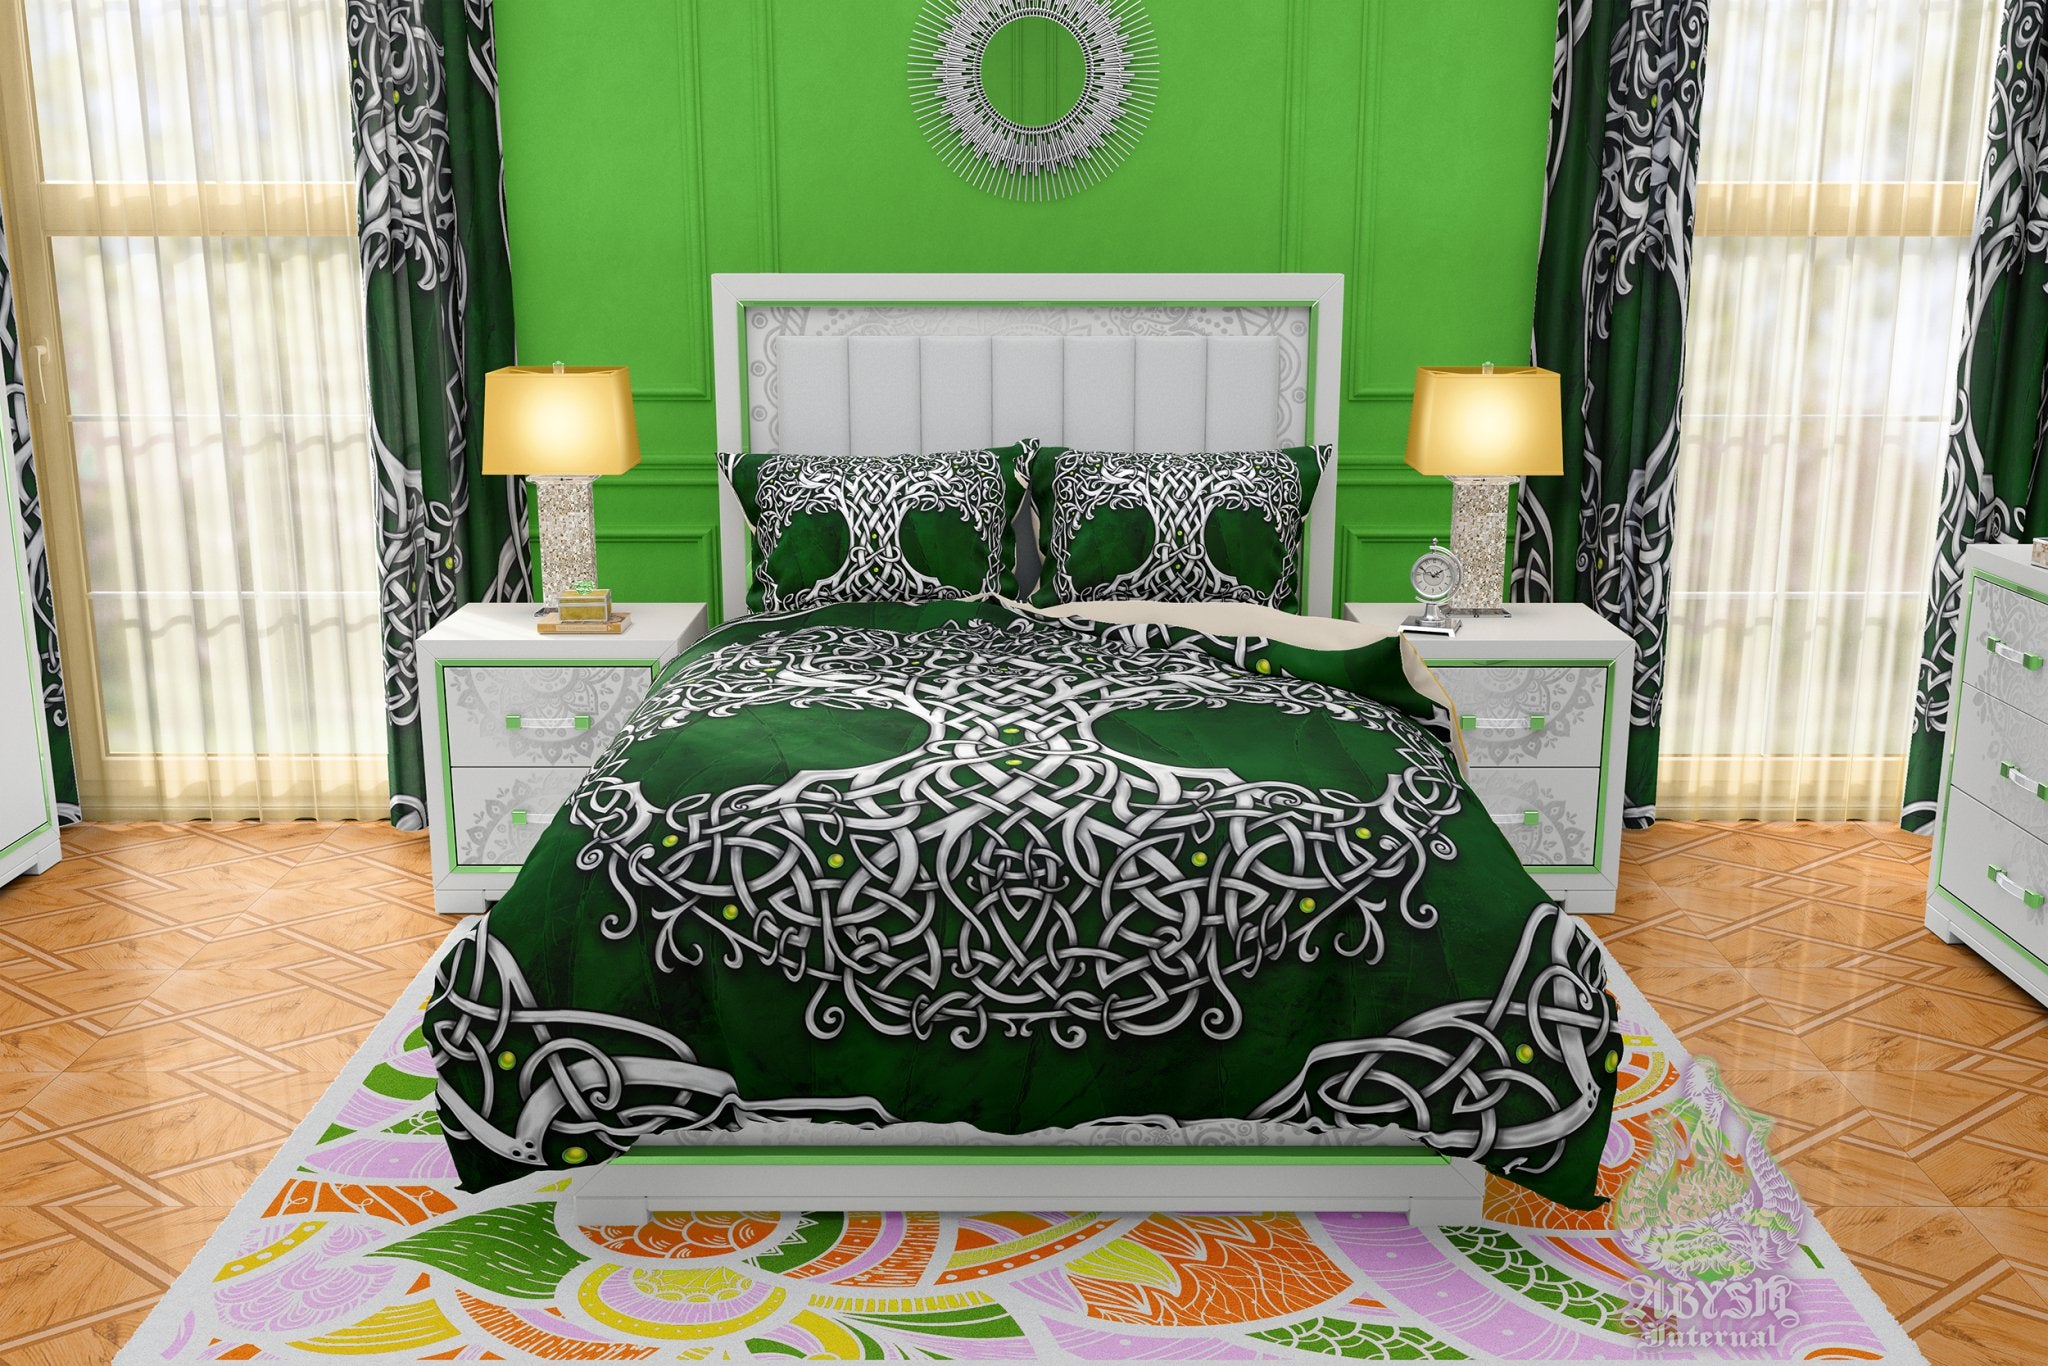 Indie Bed Cover, Pagan Bedding Set, Witchy Comforter or Duvet, Tree of Life Bedroom Decor King, Queen & Twin Size - Celtic, White and 3 Colors: Purple, Green, Black - Abysm Internal